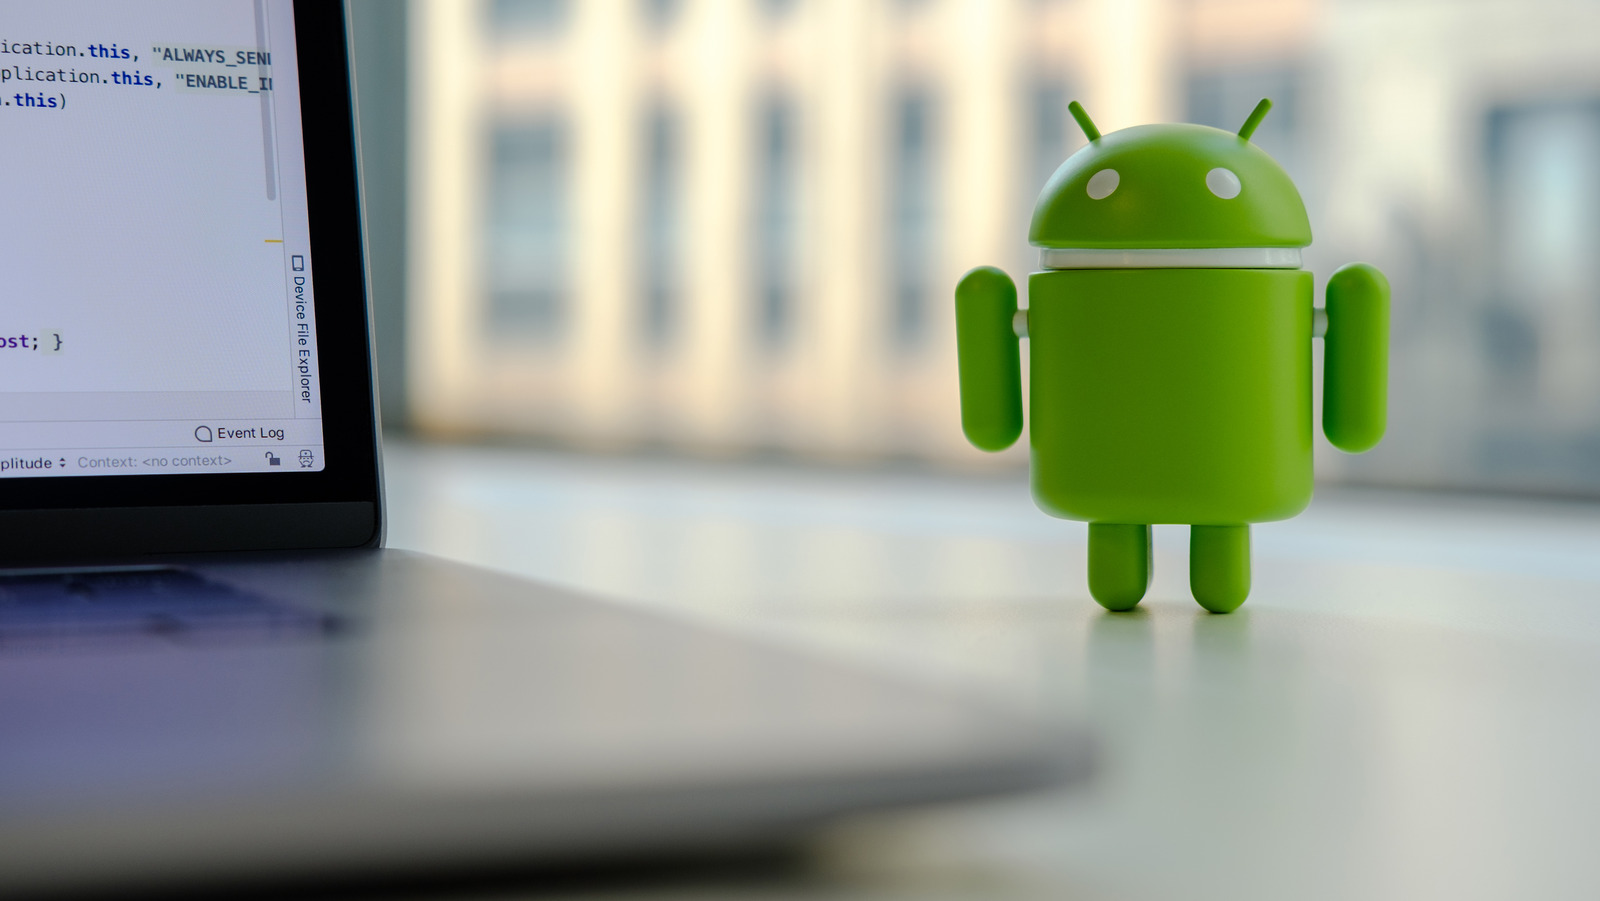 Google Operating System: Offline Android Games